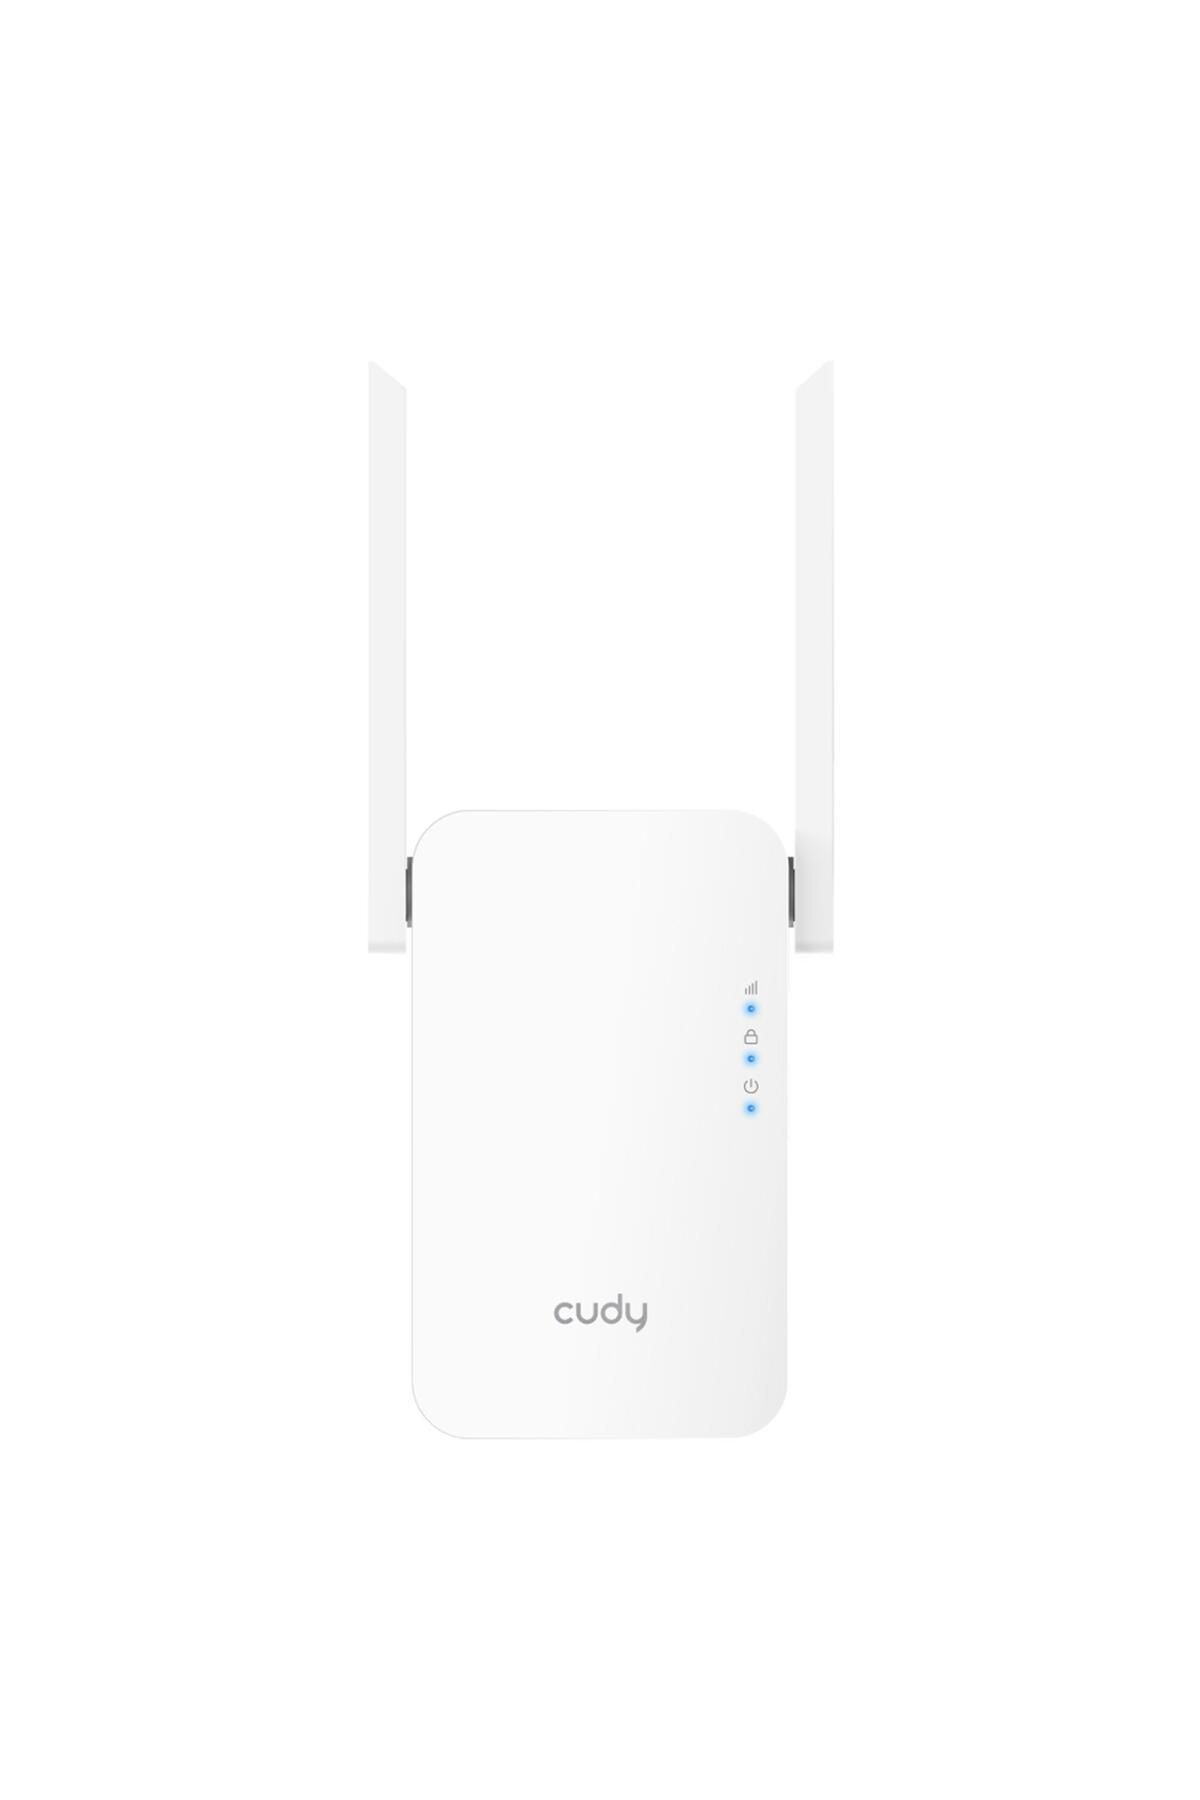 cudy RE1200 5GHz 867Mbps, 2.4GHz 300Mbps, Wi-Fi Mesh Menzil Genişletici Repeater(AC1200 Serisi)